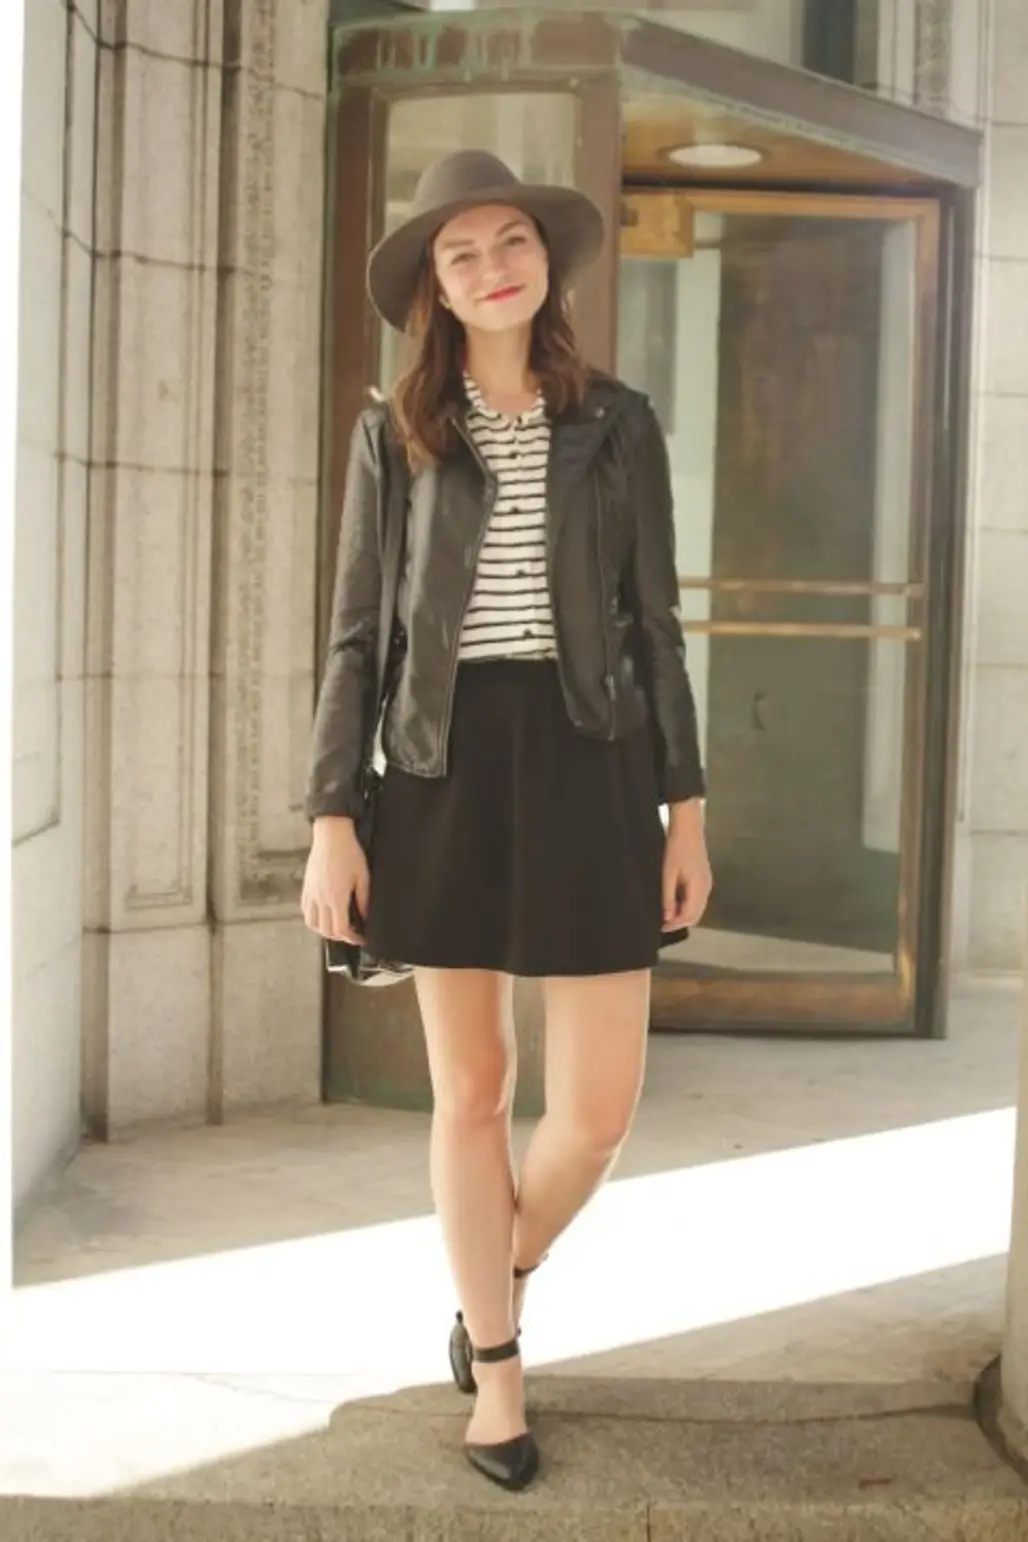 A Short Skirt and Leather Jacket